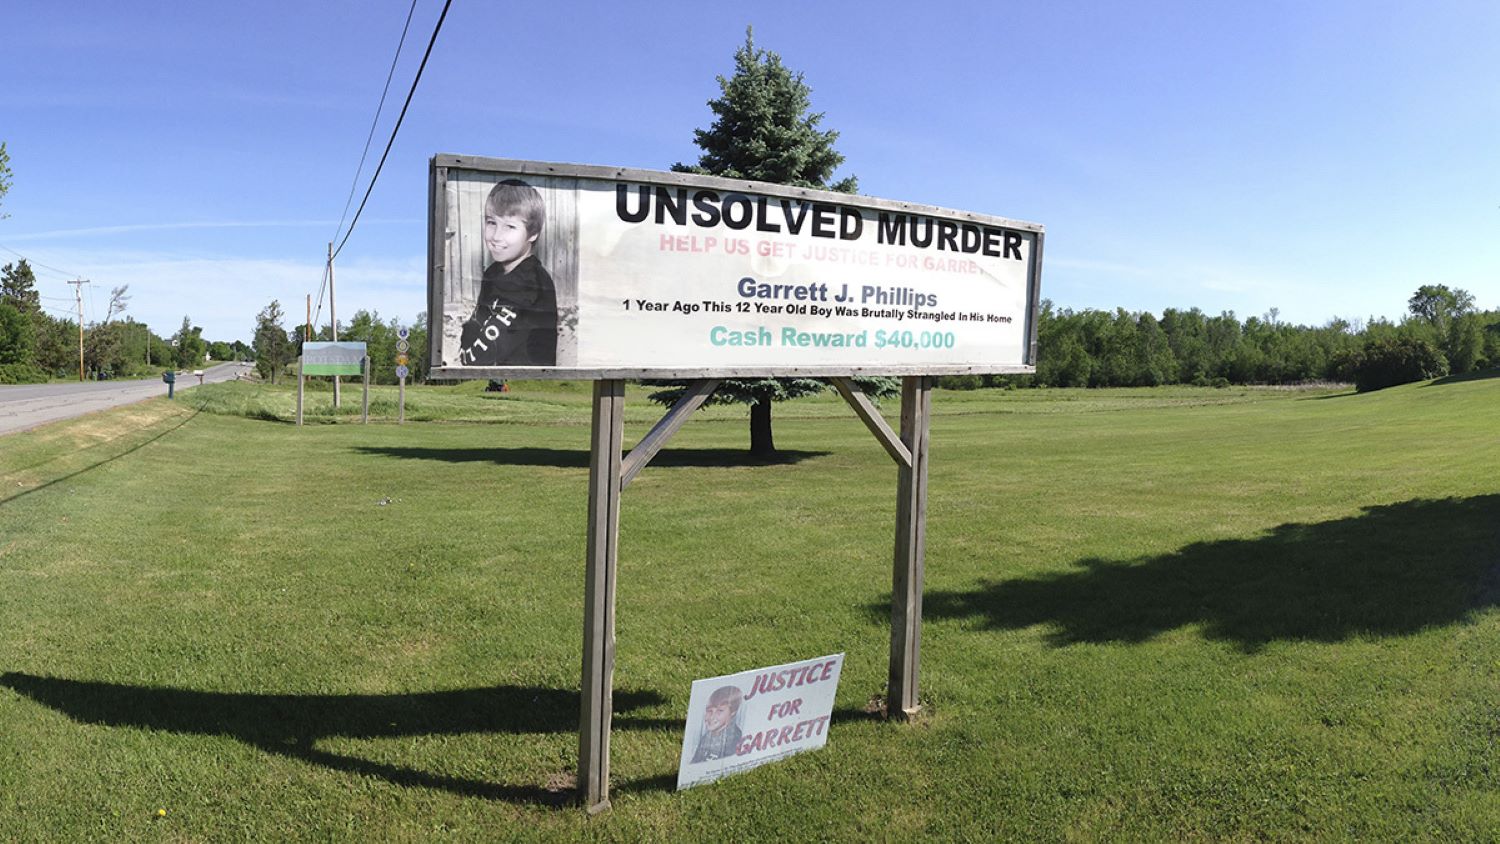 A sign on the side of the road reading "Unsolved Murder" with an image of a missing child